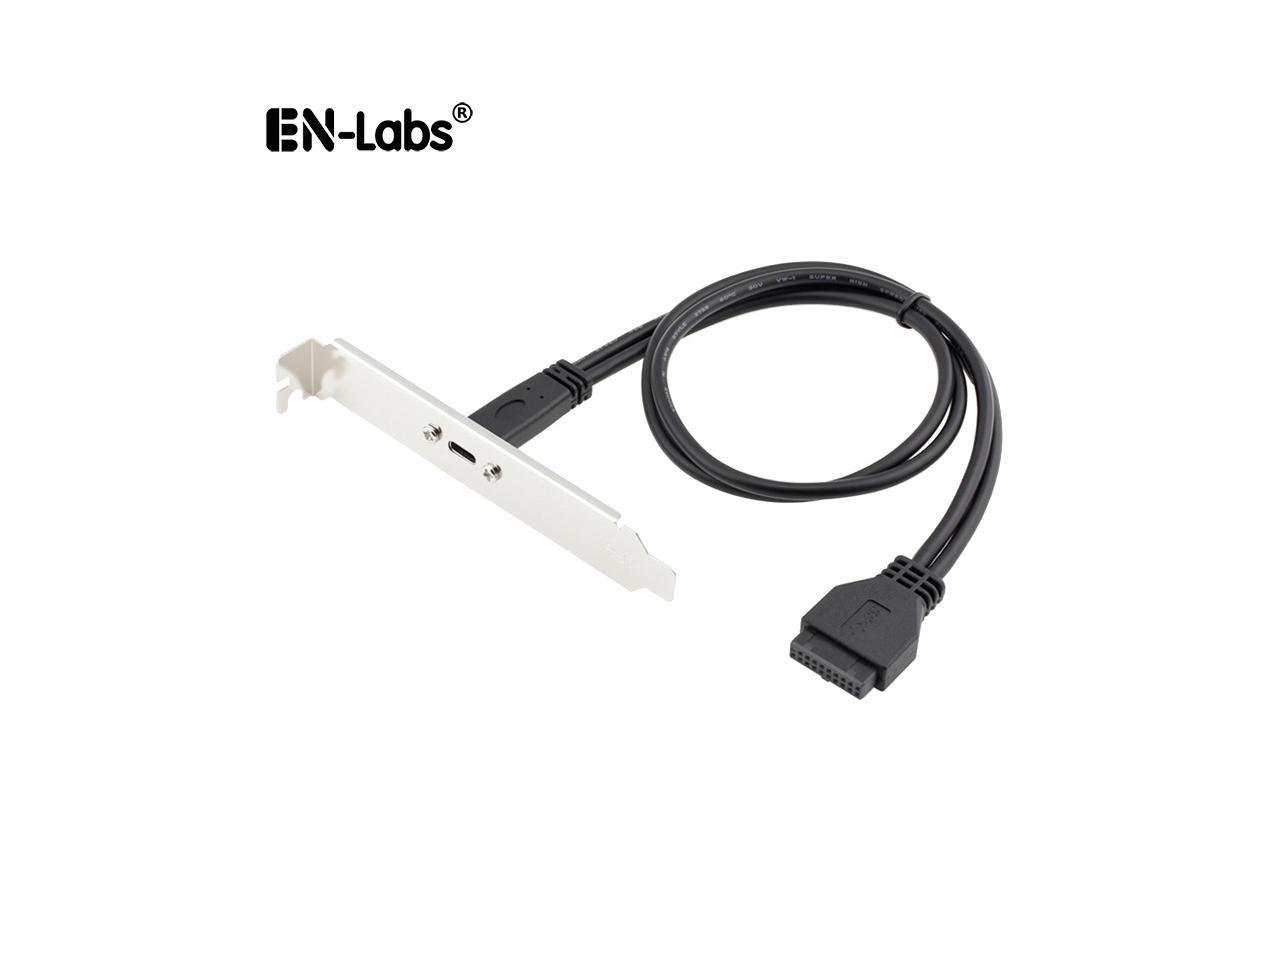 Cable Length: 0.5M Cables USB 3.0 Slot Plate Adapter Bracket Cable with Built-in 20-Pin Header F/2AF PCI